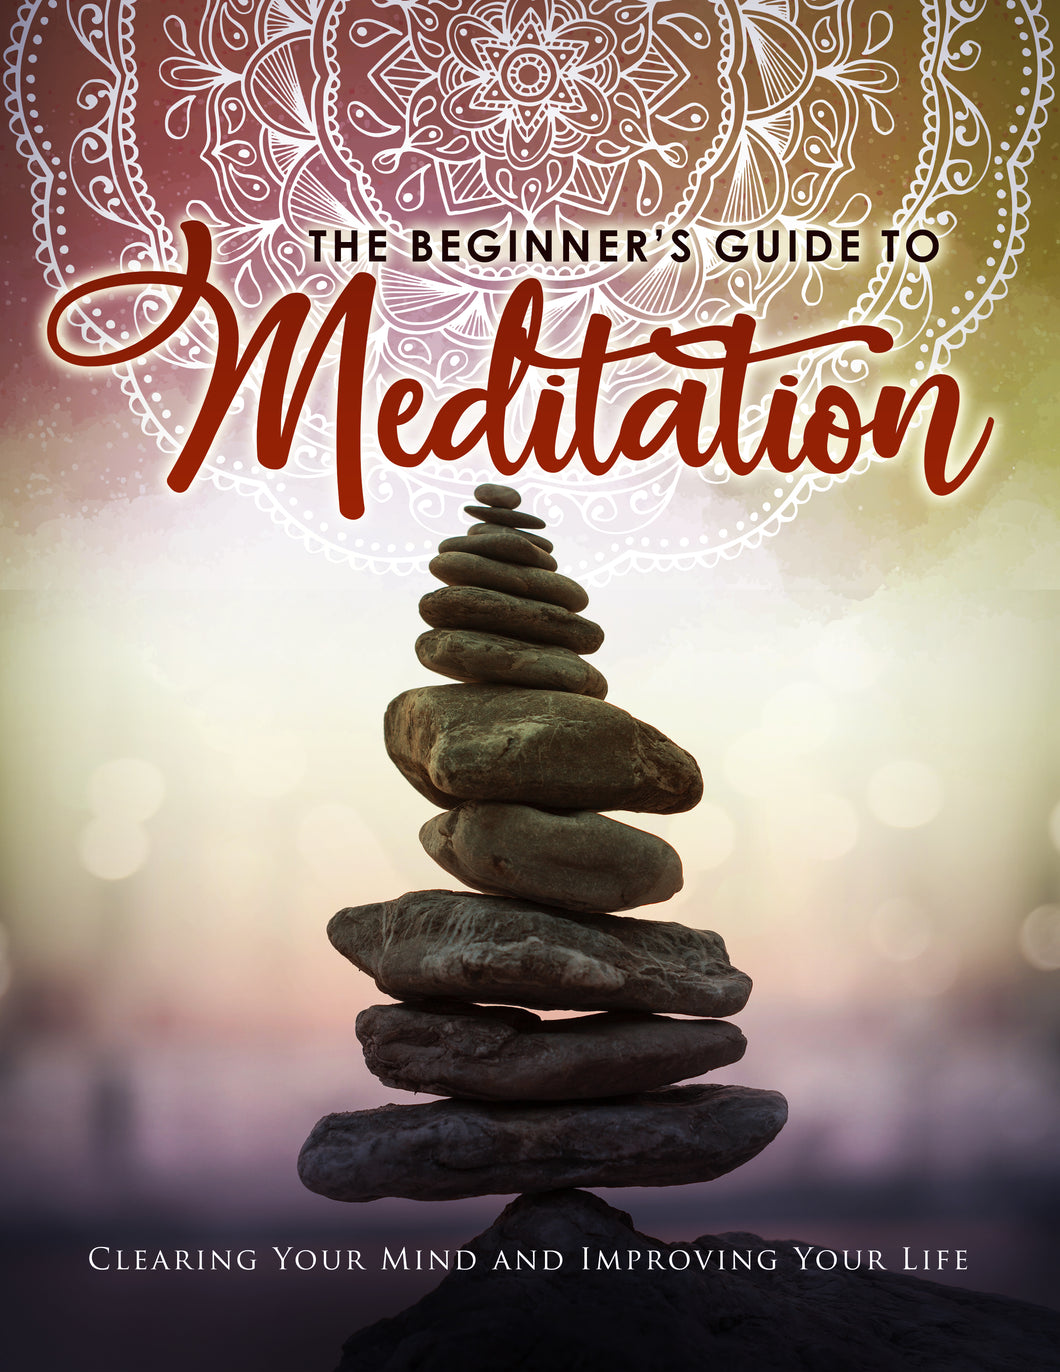 License - The Beginners Guide To Meditation